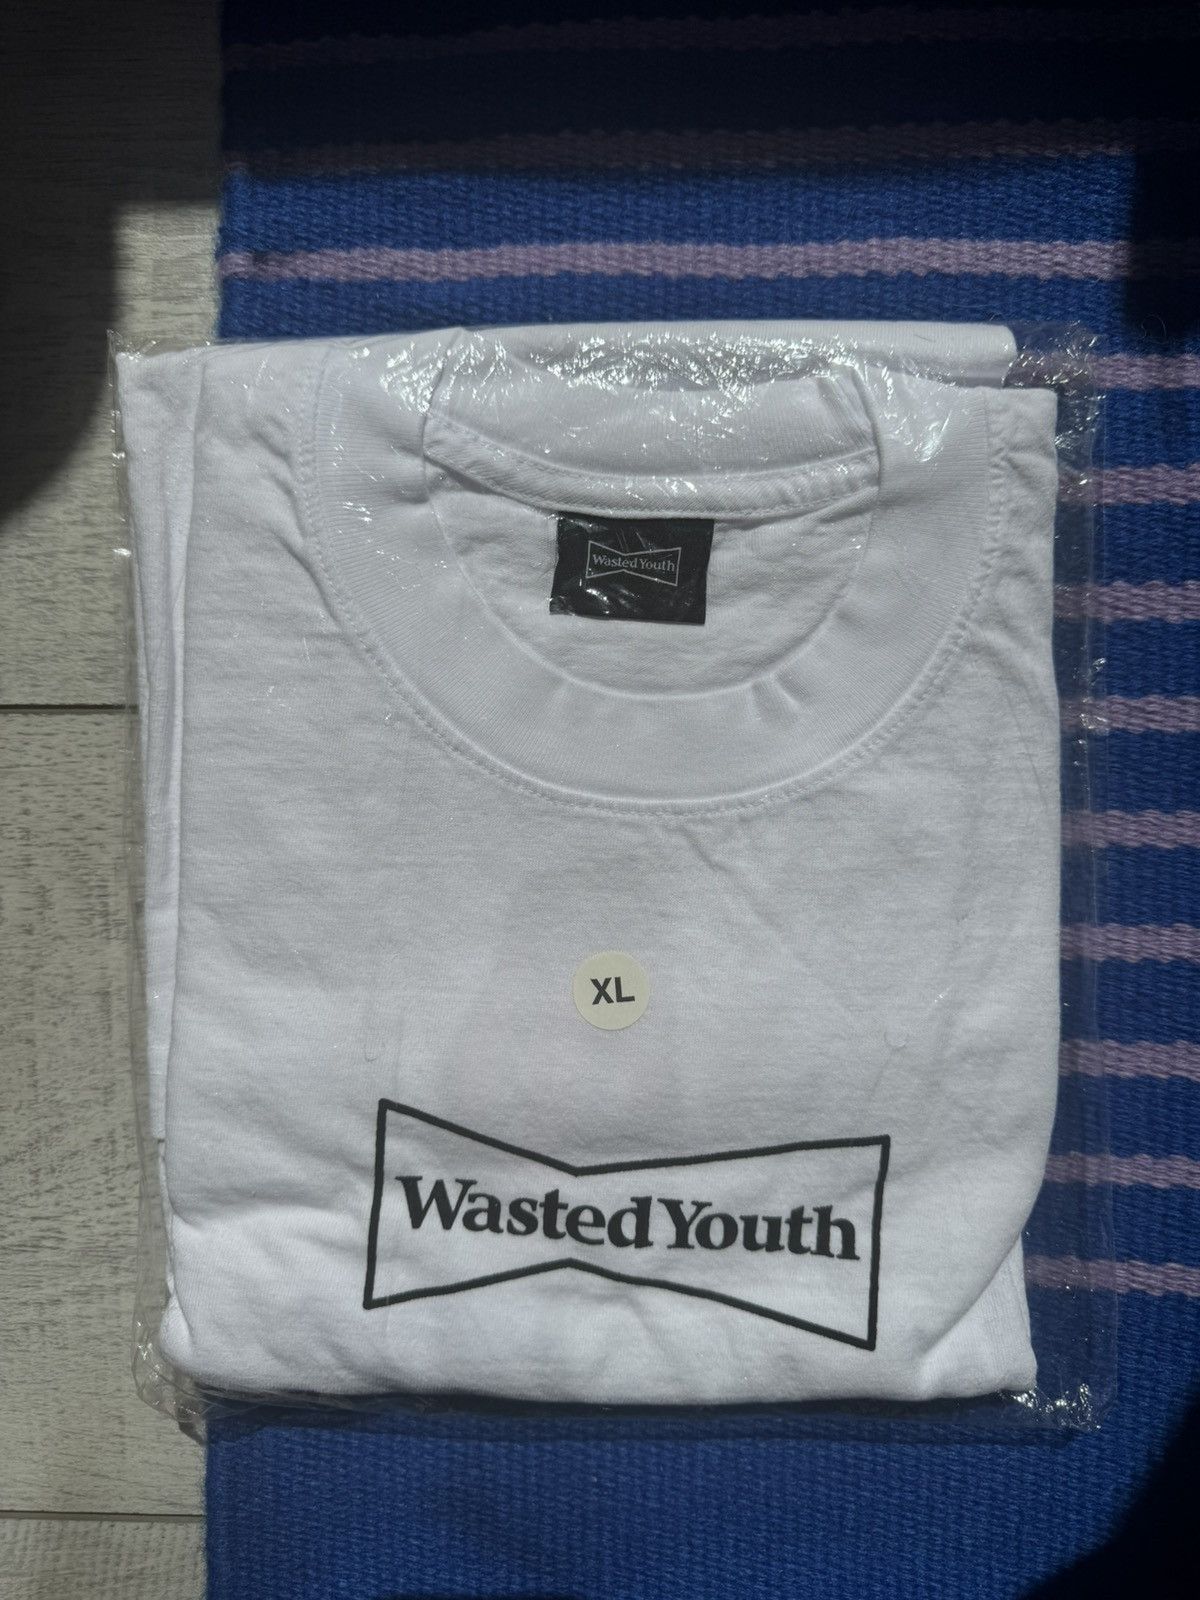 Girls Dont Cry Wasted Youth XL T-shirt brand new by Verdy | Grailed